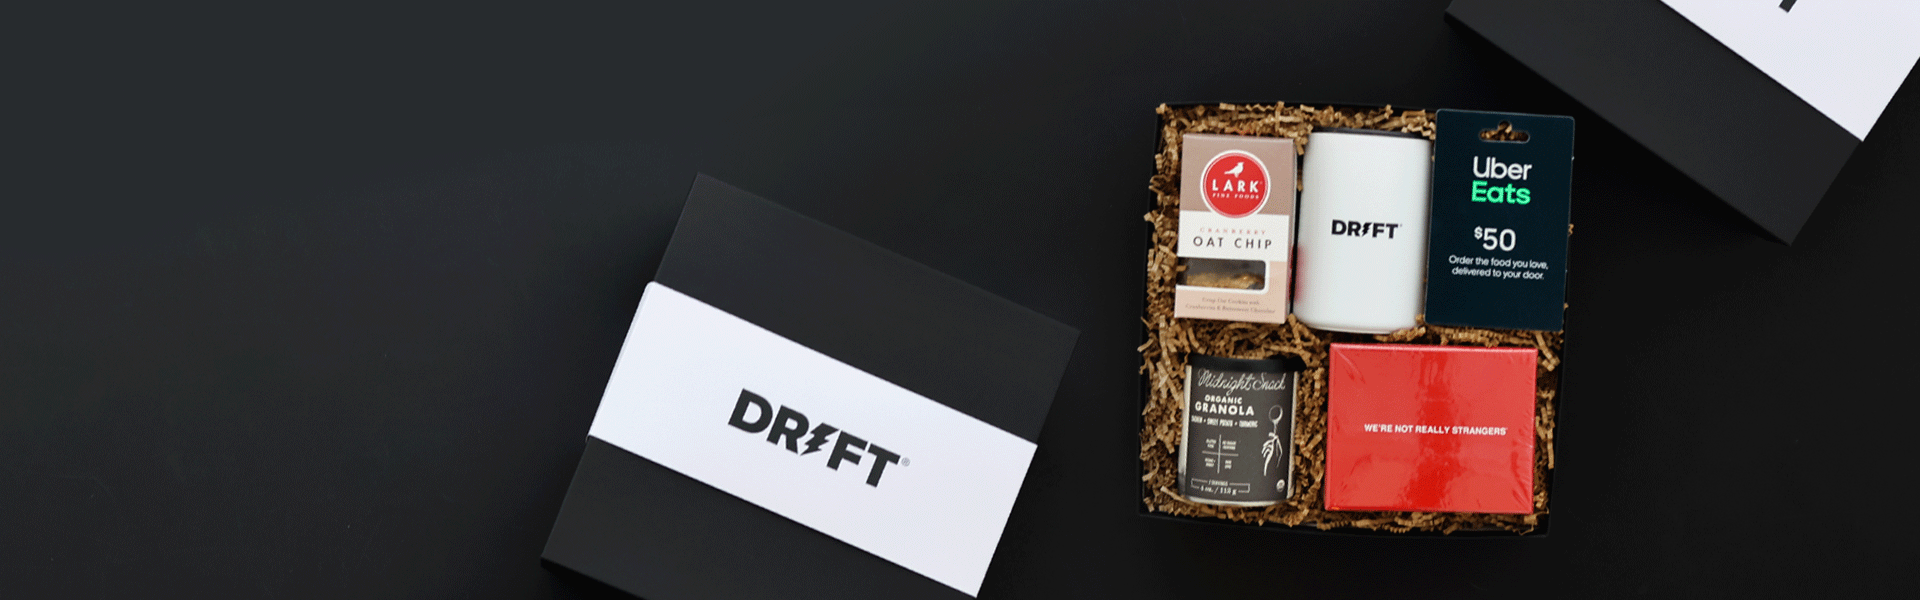 client gift boxes for drift